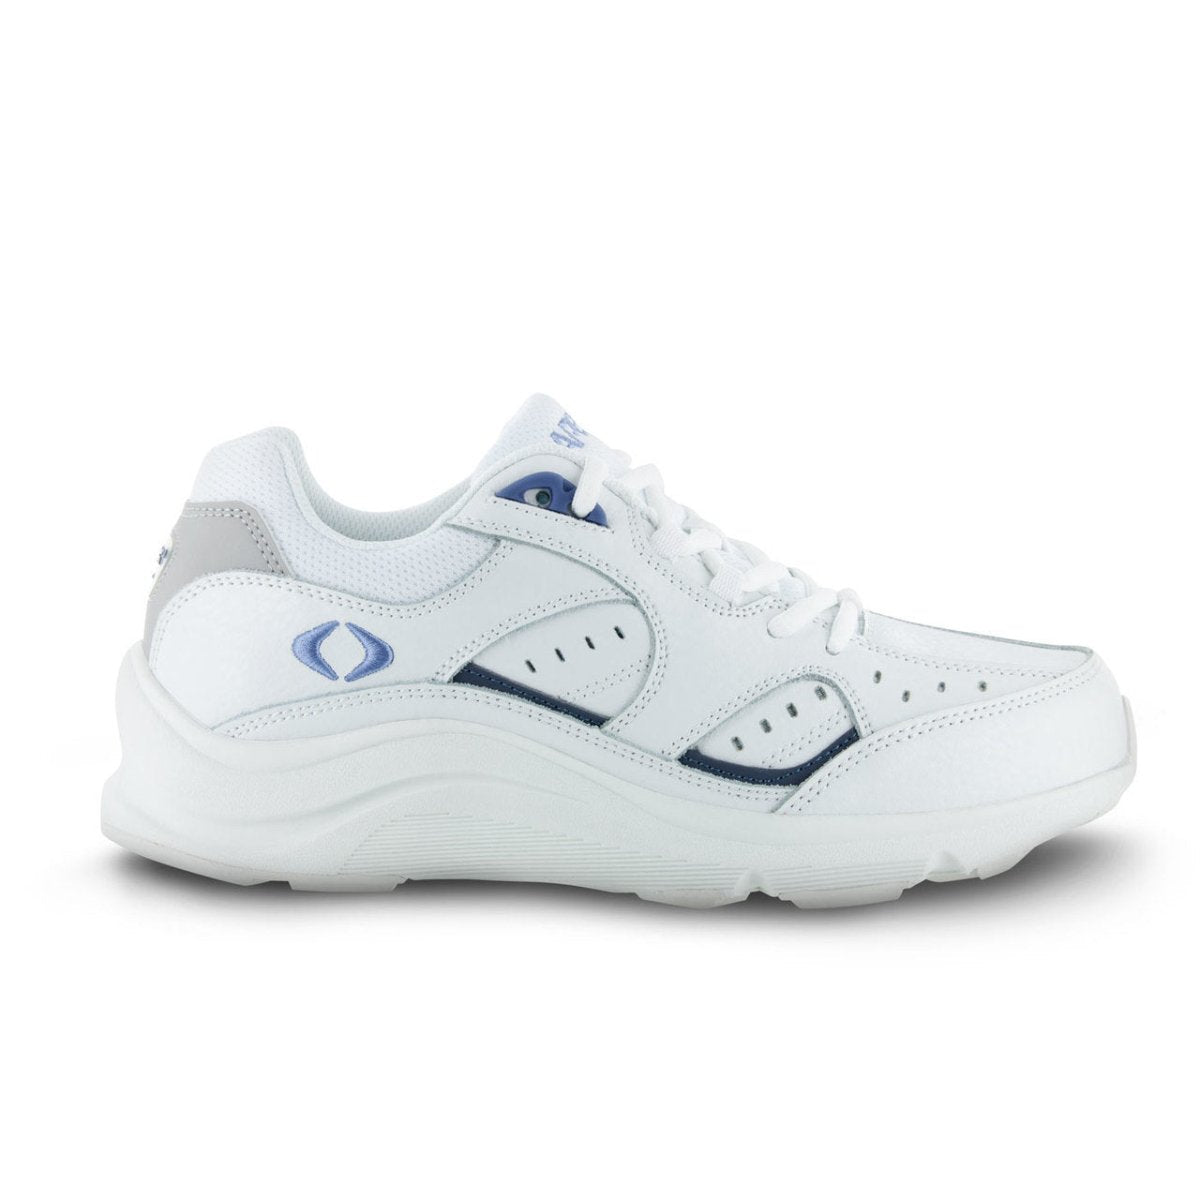 APEX V854 WALKER WOMEN'S SHOES IN WHITE/PERI - TLW Shoes